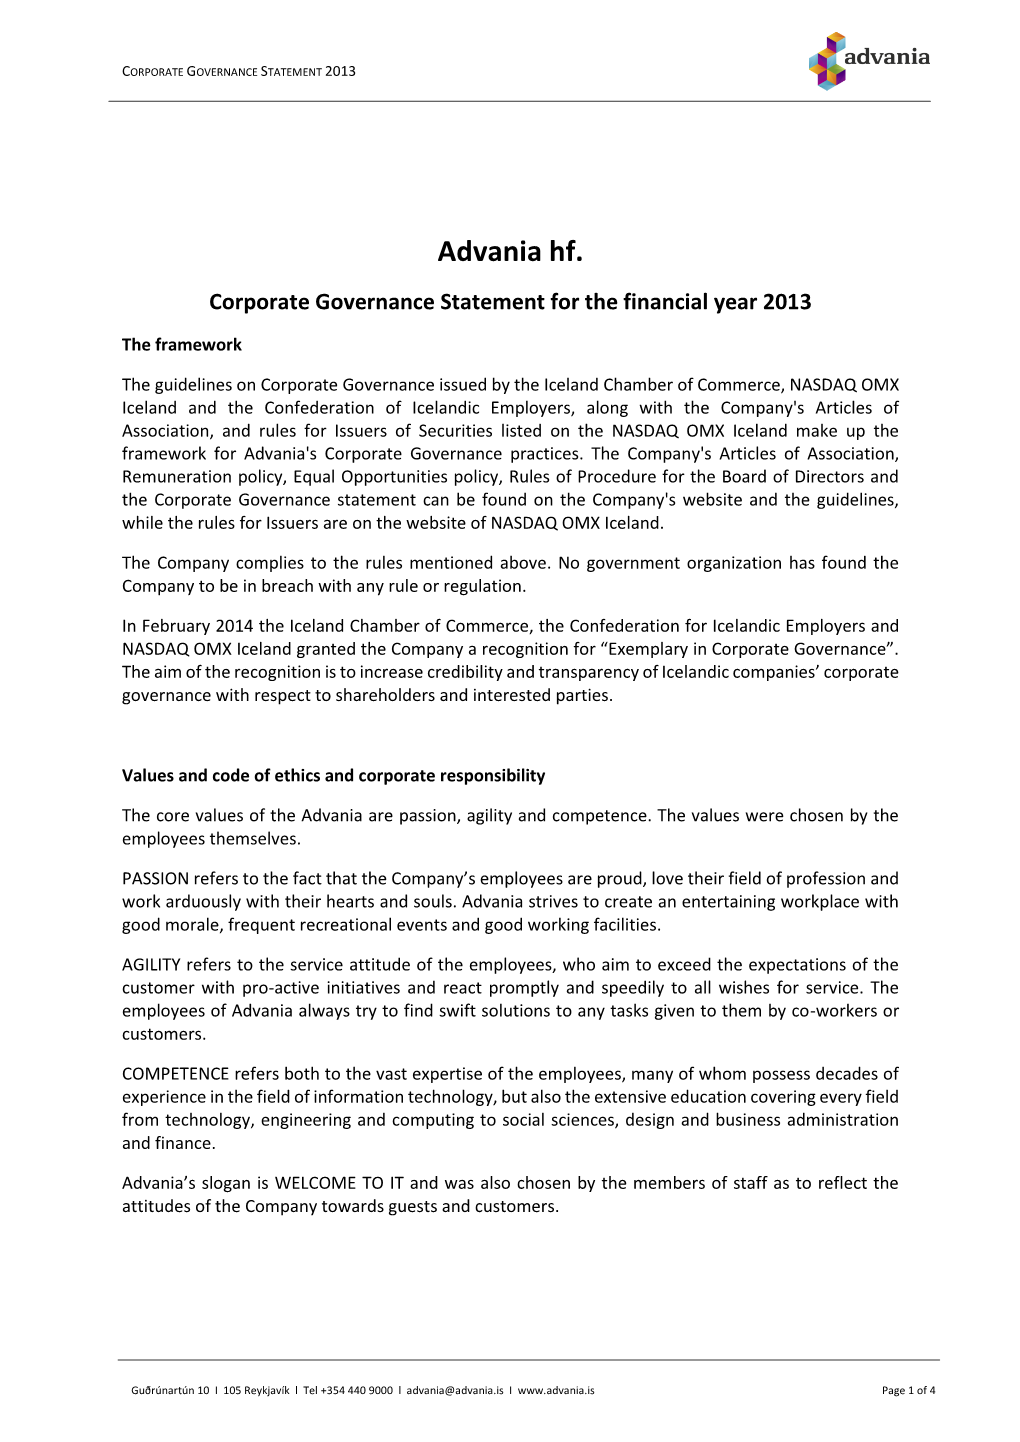 Corporate Governance Statement for the Financial Year 2013